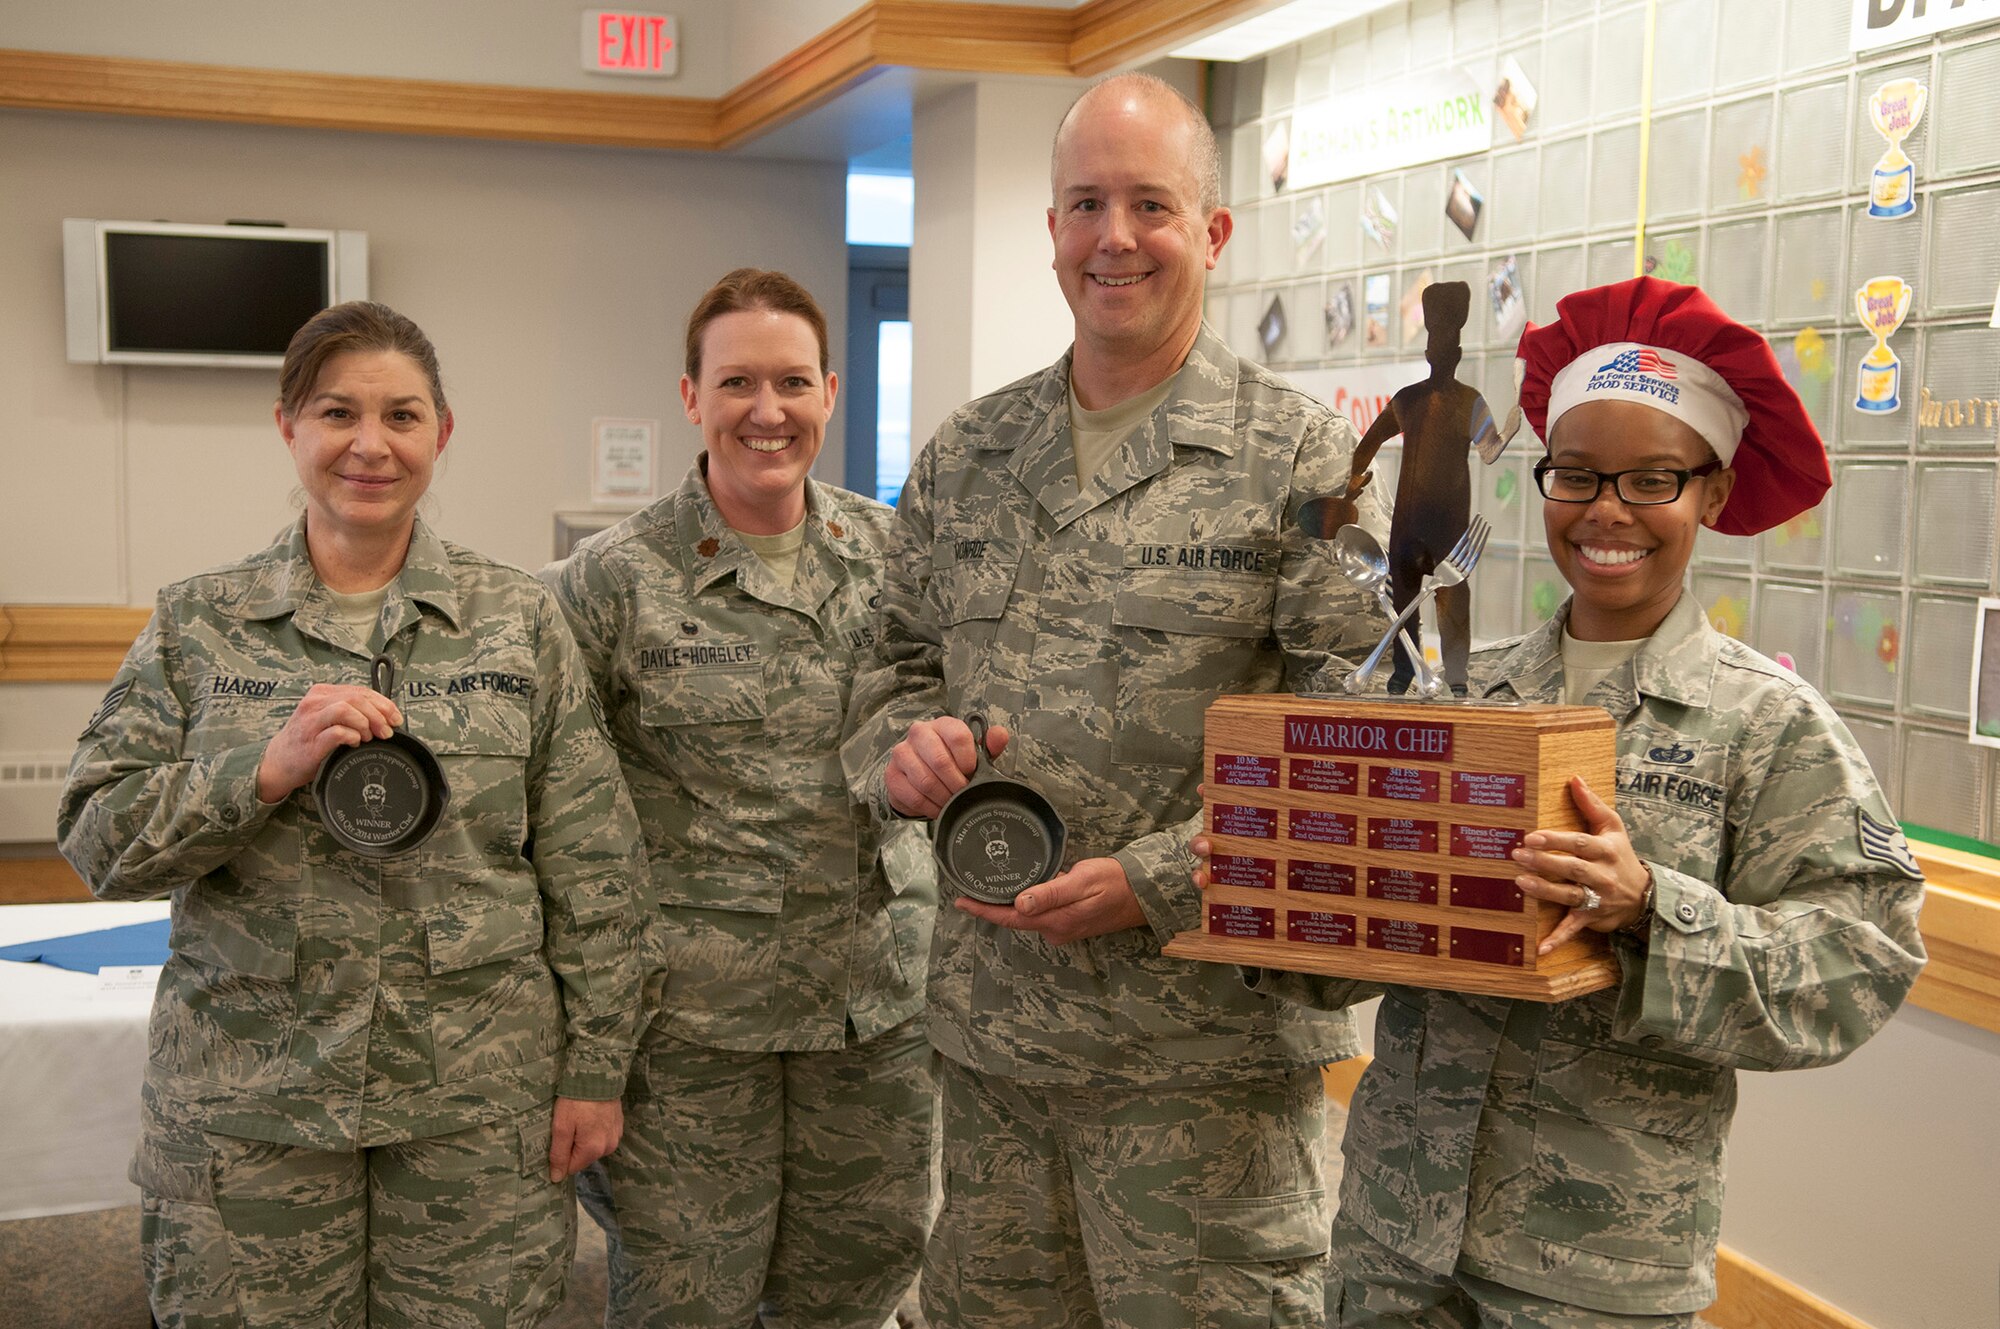 Staff Sgts. Sara Hardy and Todd Monroe, the Fourth Quarter Warrior Chef Competition’s winning team, pose with their trophy skillets Dec. 4 at the Elkhorn Dining Facility. Both are from the 120th Force Support Squadron, Montana Air National Guard. Standing with them are Maj. Karen Dayle-Horsley, 341st Force Support Squadron commander, and event coordinator Staff Sgt. Amber Moore, 341st FSS noncommissioned officer in charge of missile alert feeding operations.  (U.S. Air Force photo/Tech. Sgt. Christina Perchine)